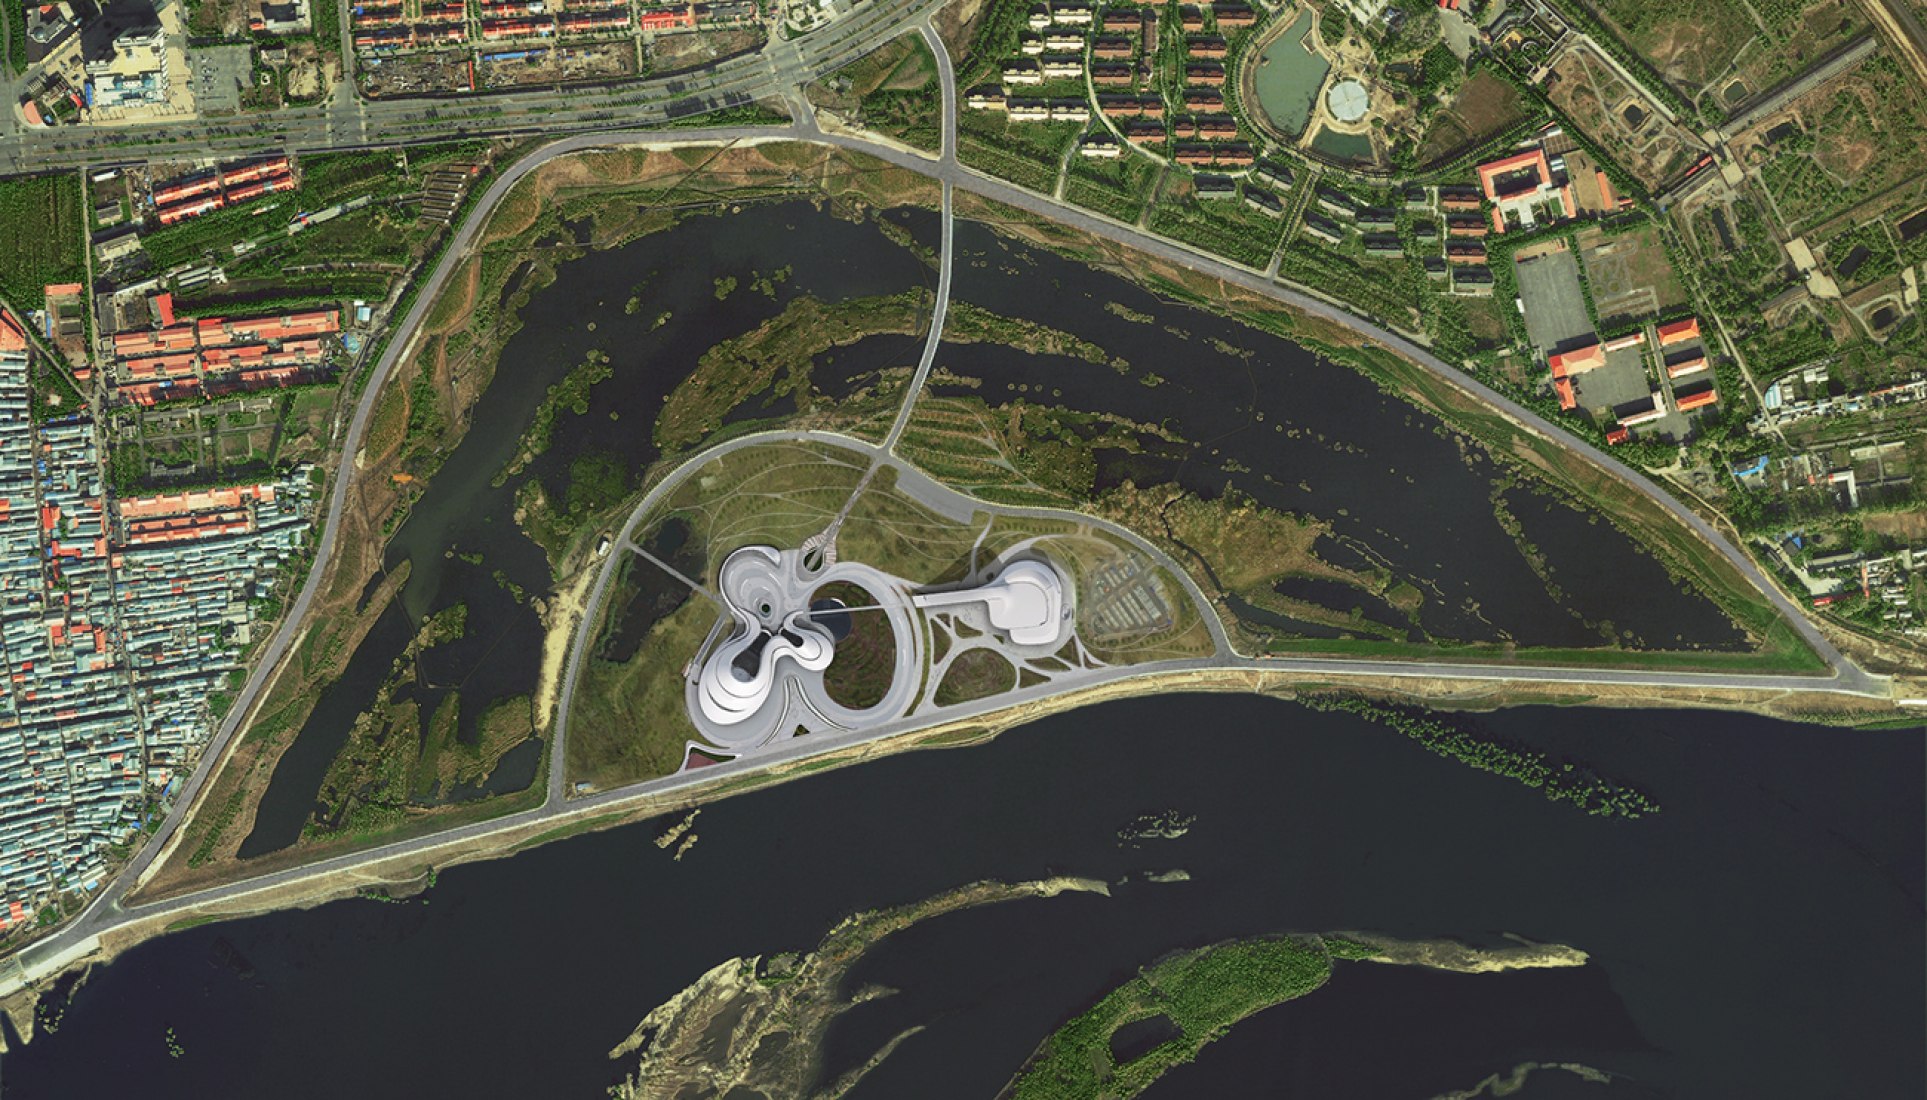 Overview. Harbin Opera House by MAD Architects.